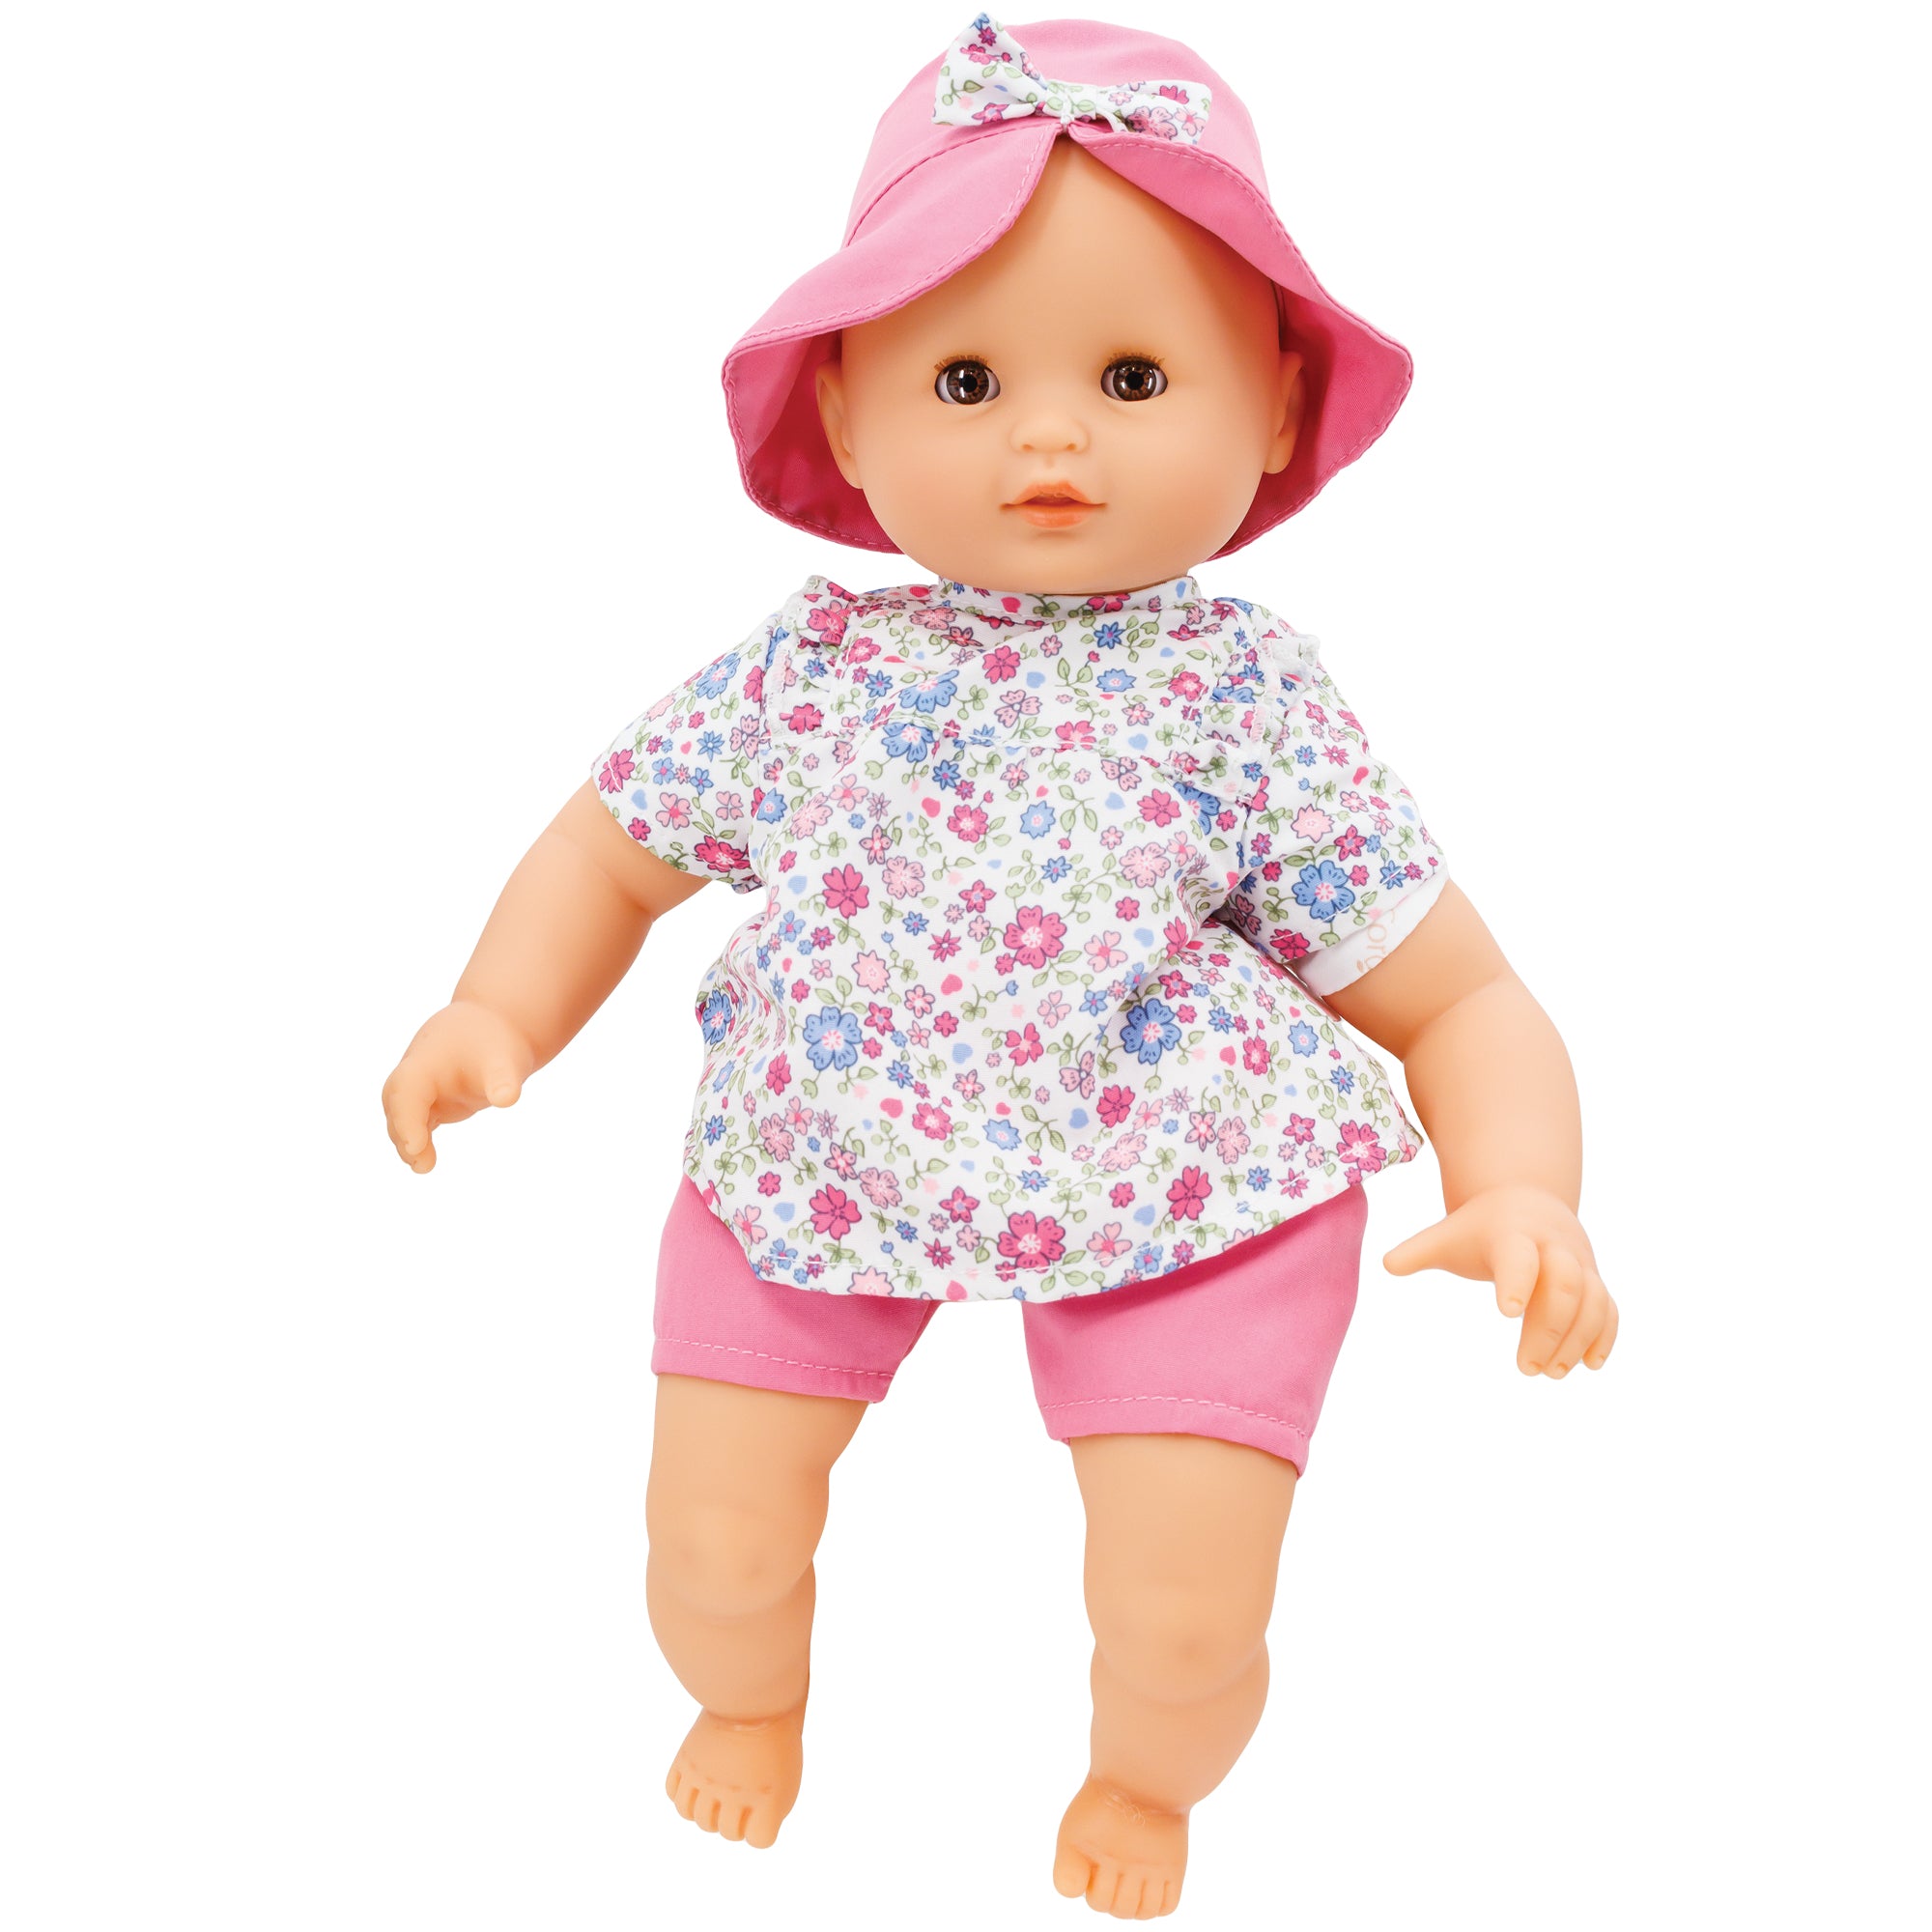 Corolle’s Bebe Coralie. The light skinned baby doll has brown blinkable eyes. She is wearing pink shorts and a floral shirt with a variety of pinks and periwinkle colored flowers in different sizes. She is wearing a pink hat that has a bow in the middle that matches the shirt print.